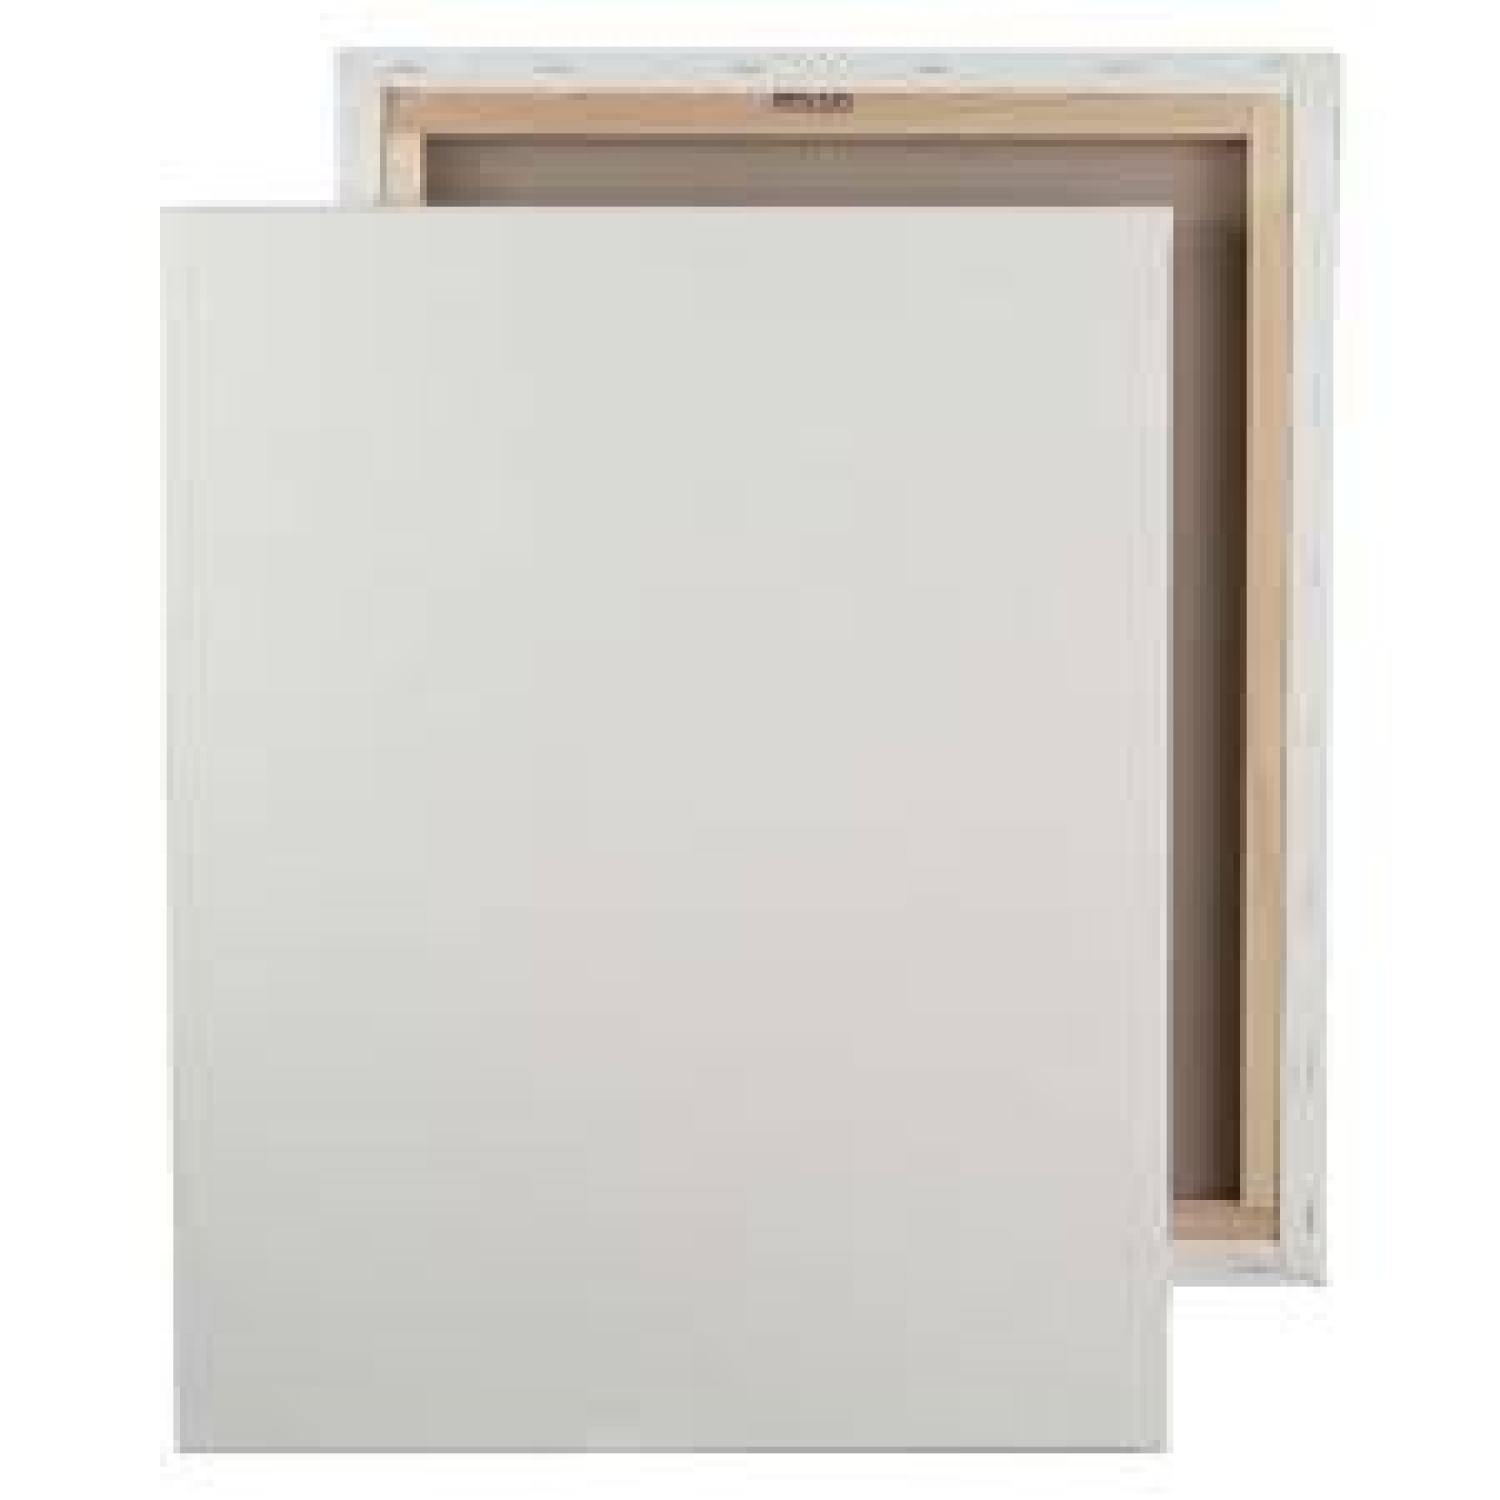 COMBO TOAN 40x50 4 chiếc+ 40x60 4 chiếc